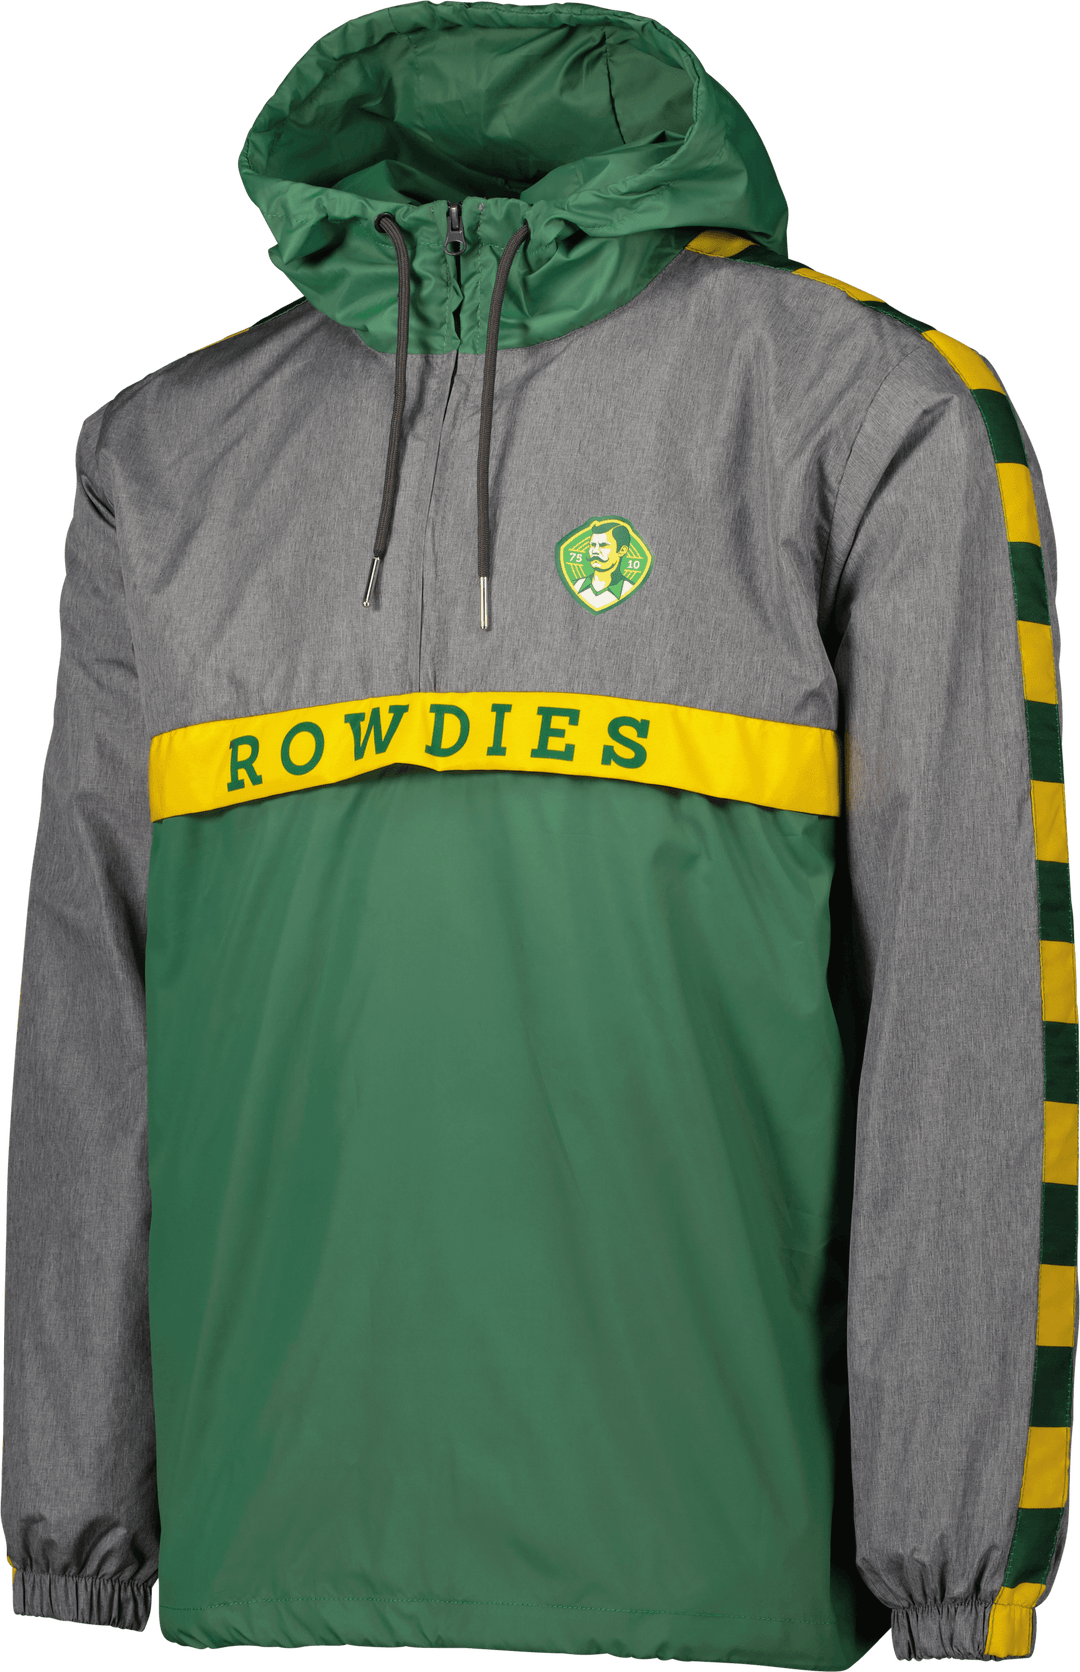 ROWDIES MEN'S GREY AND GREEN SPORT DESIGN SWEDEN HALF ZIP PULLOVER JACKET - The Bay Republic | Team Store of the Tampa Bay Rays & Rowdies